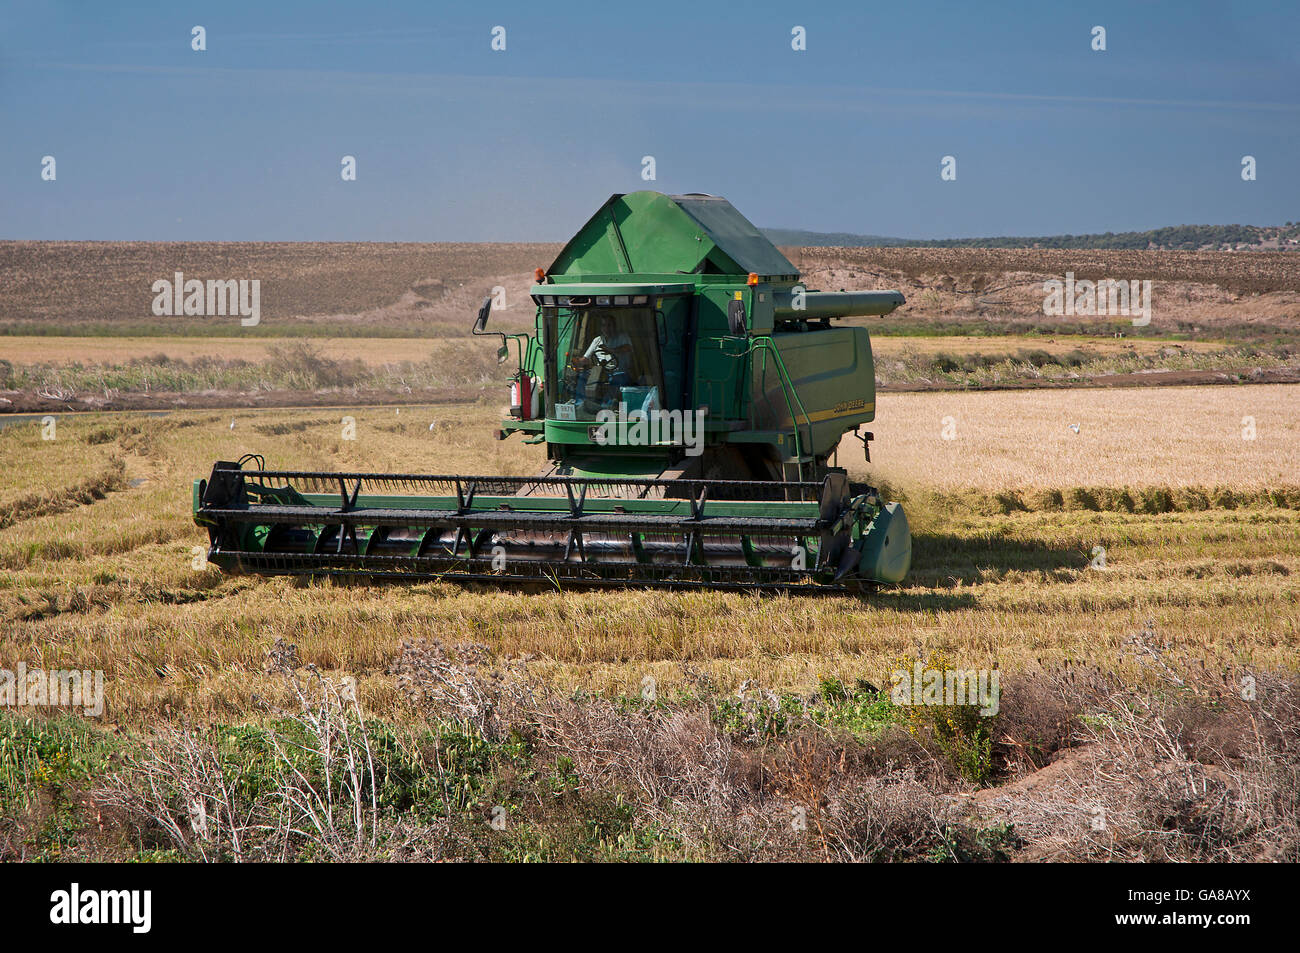 Agricultural machinery, Benalup, Cadiz province, Region of Andalusia, Spain, Europe Stock Photo